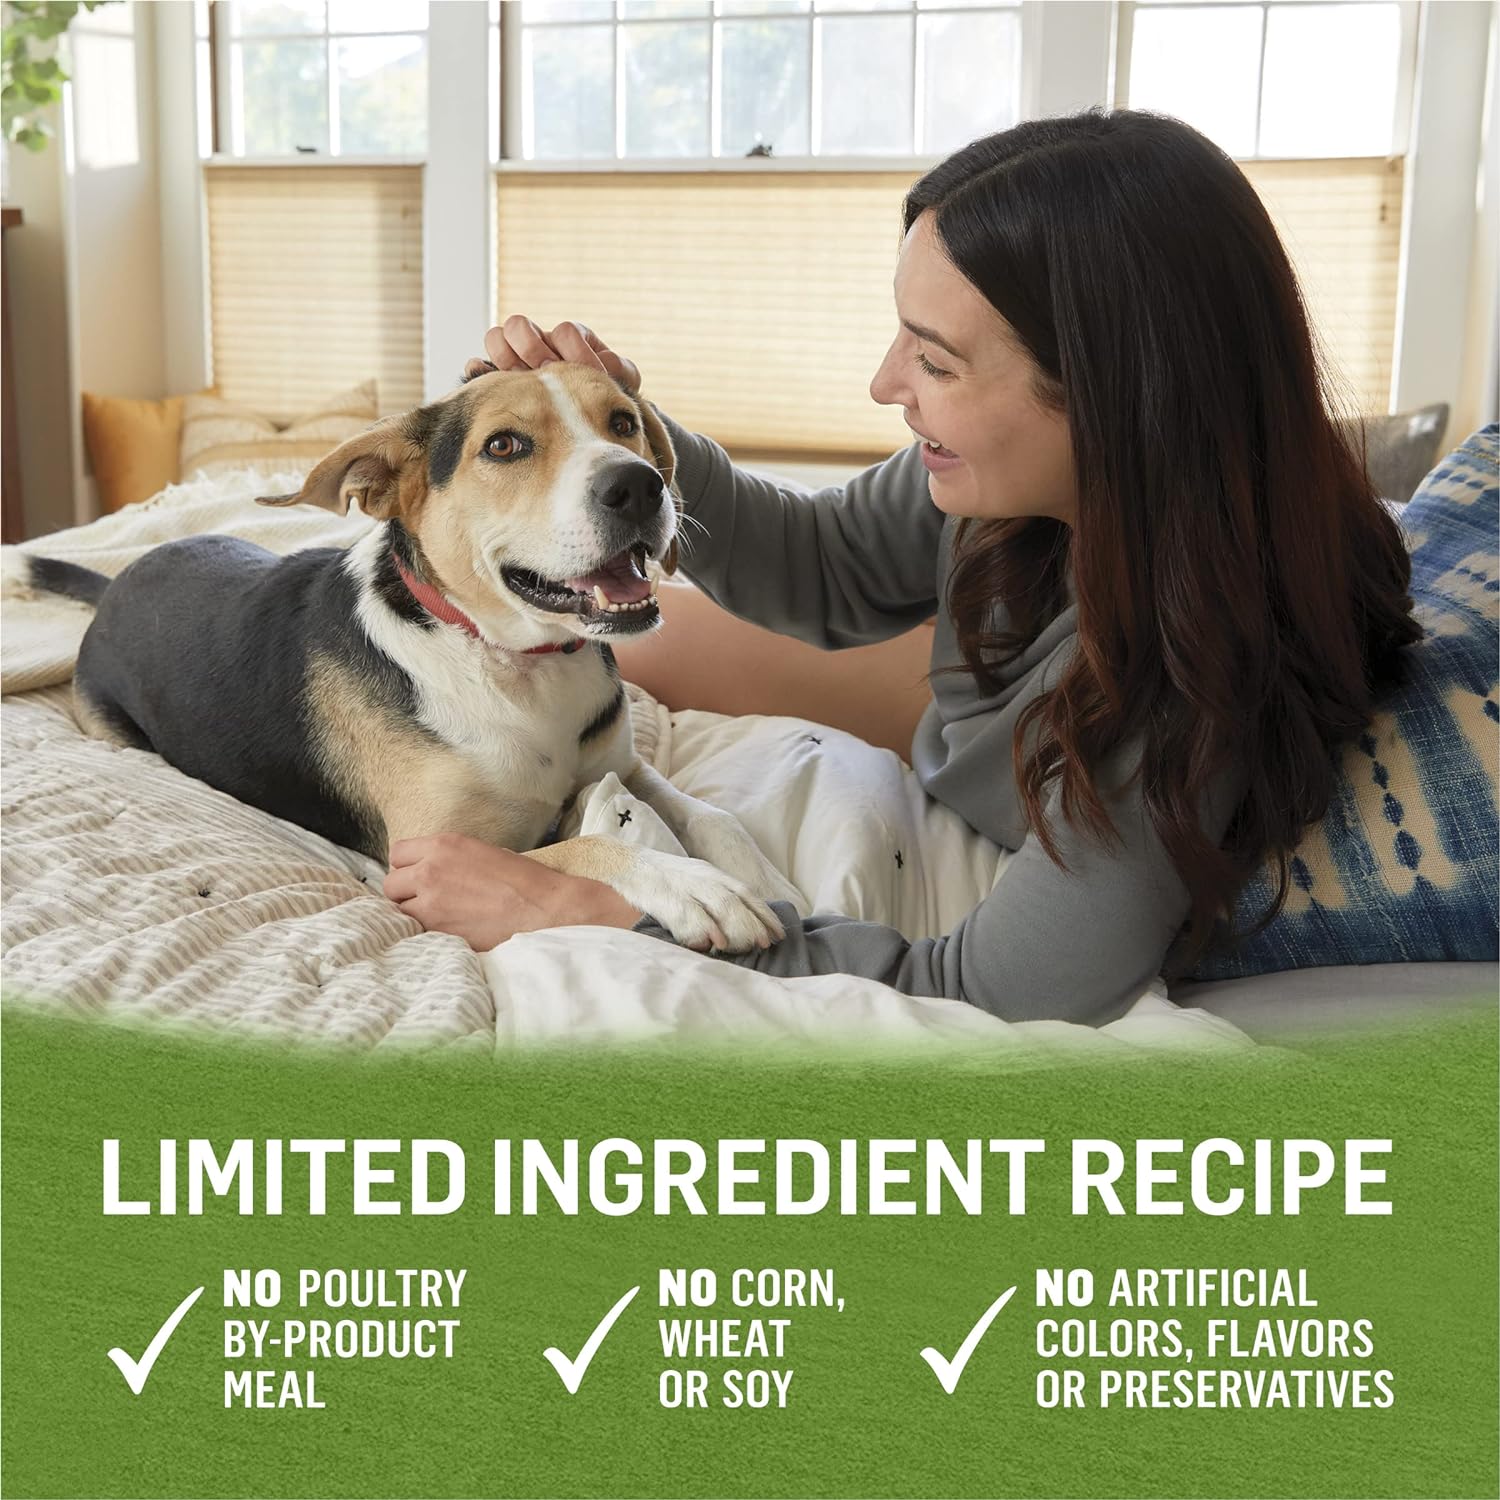 Purina Beyond Grain Free, Natural Pate Wet Dog Food, Grain Free Chicken, Lamb & Spinach Recipe - (12) 13 oz. Cans: Pet Supplies: Amazon.com